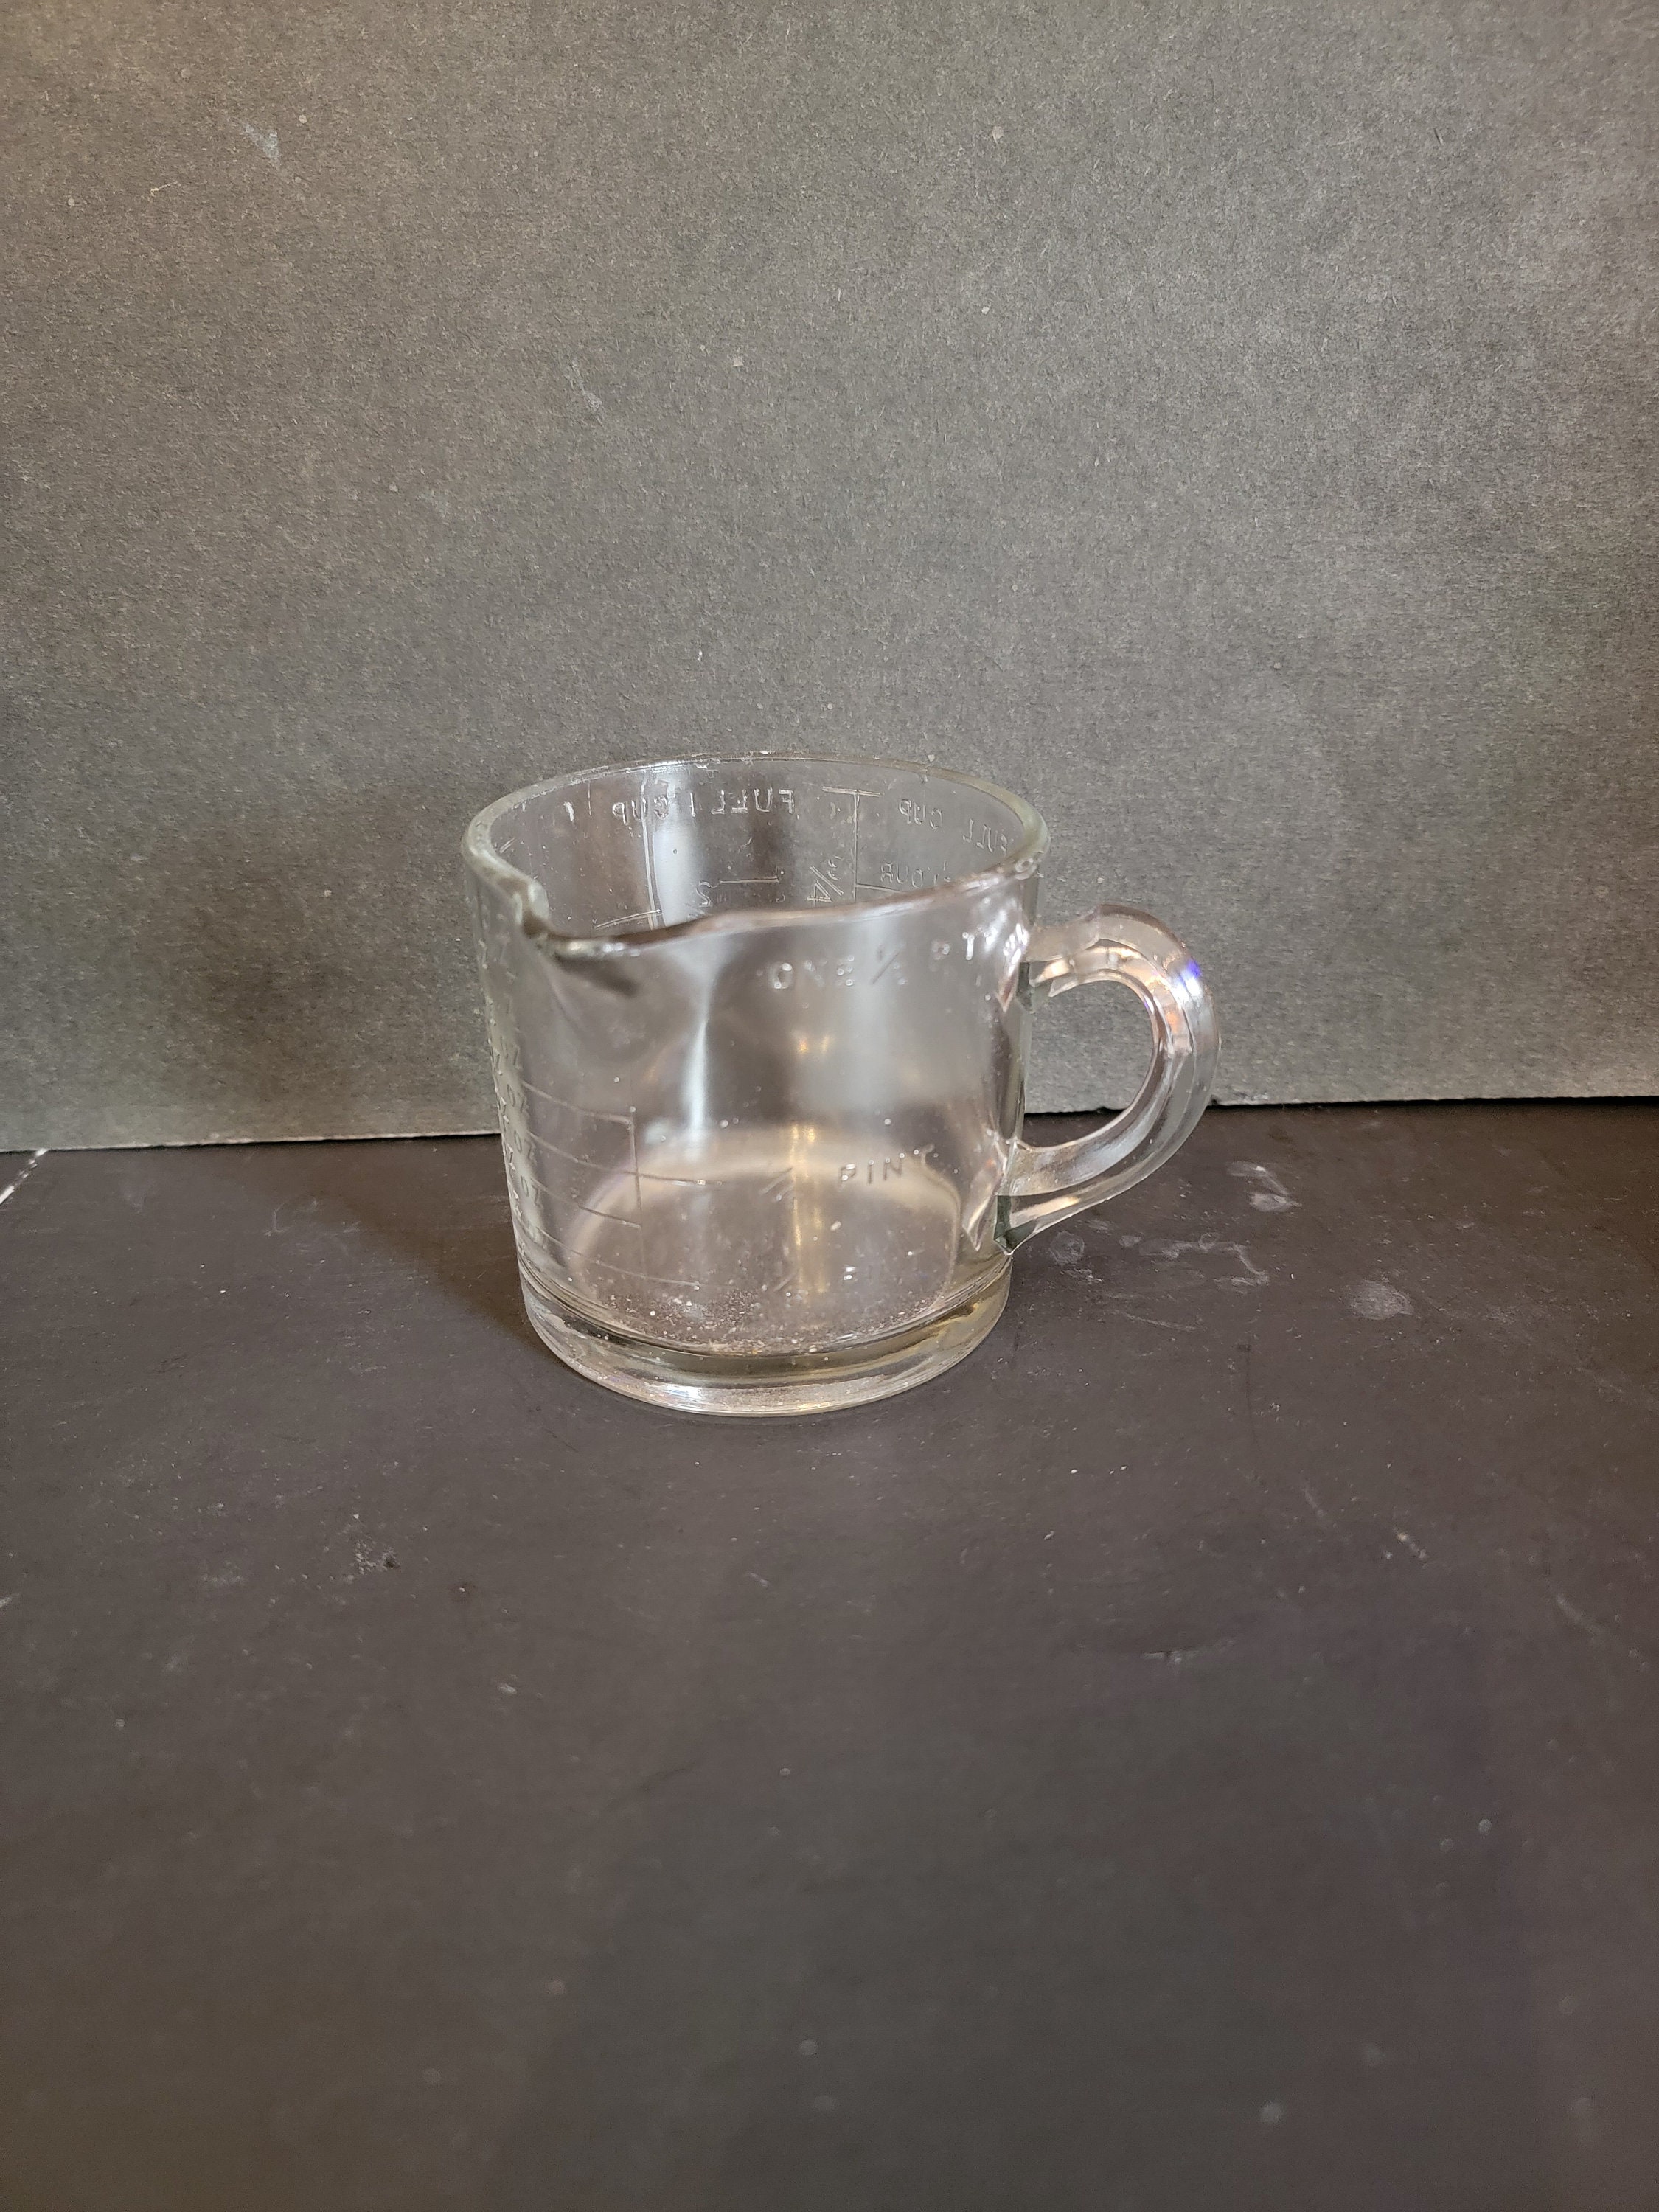 Vintage Glasbake 4 Cup Glass Measuring Cup J-2031 Shows Use, Small Chips